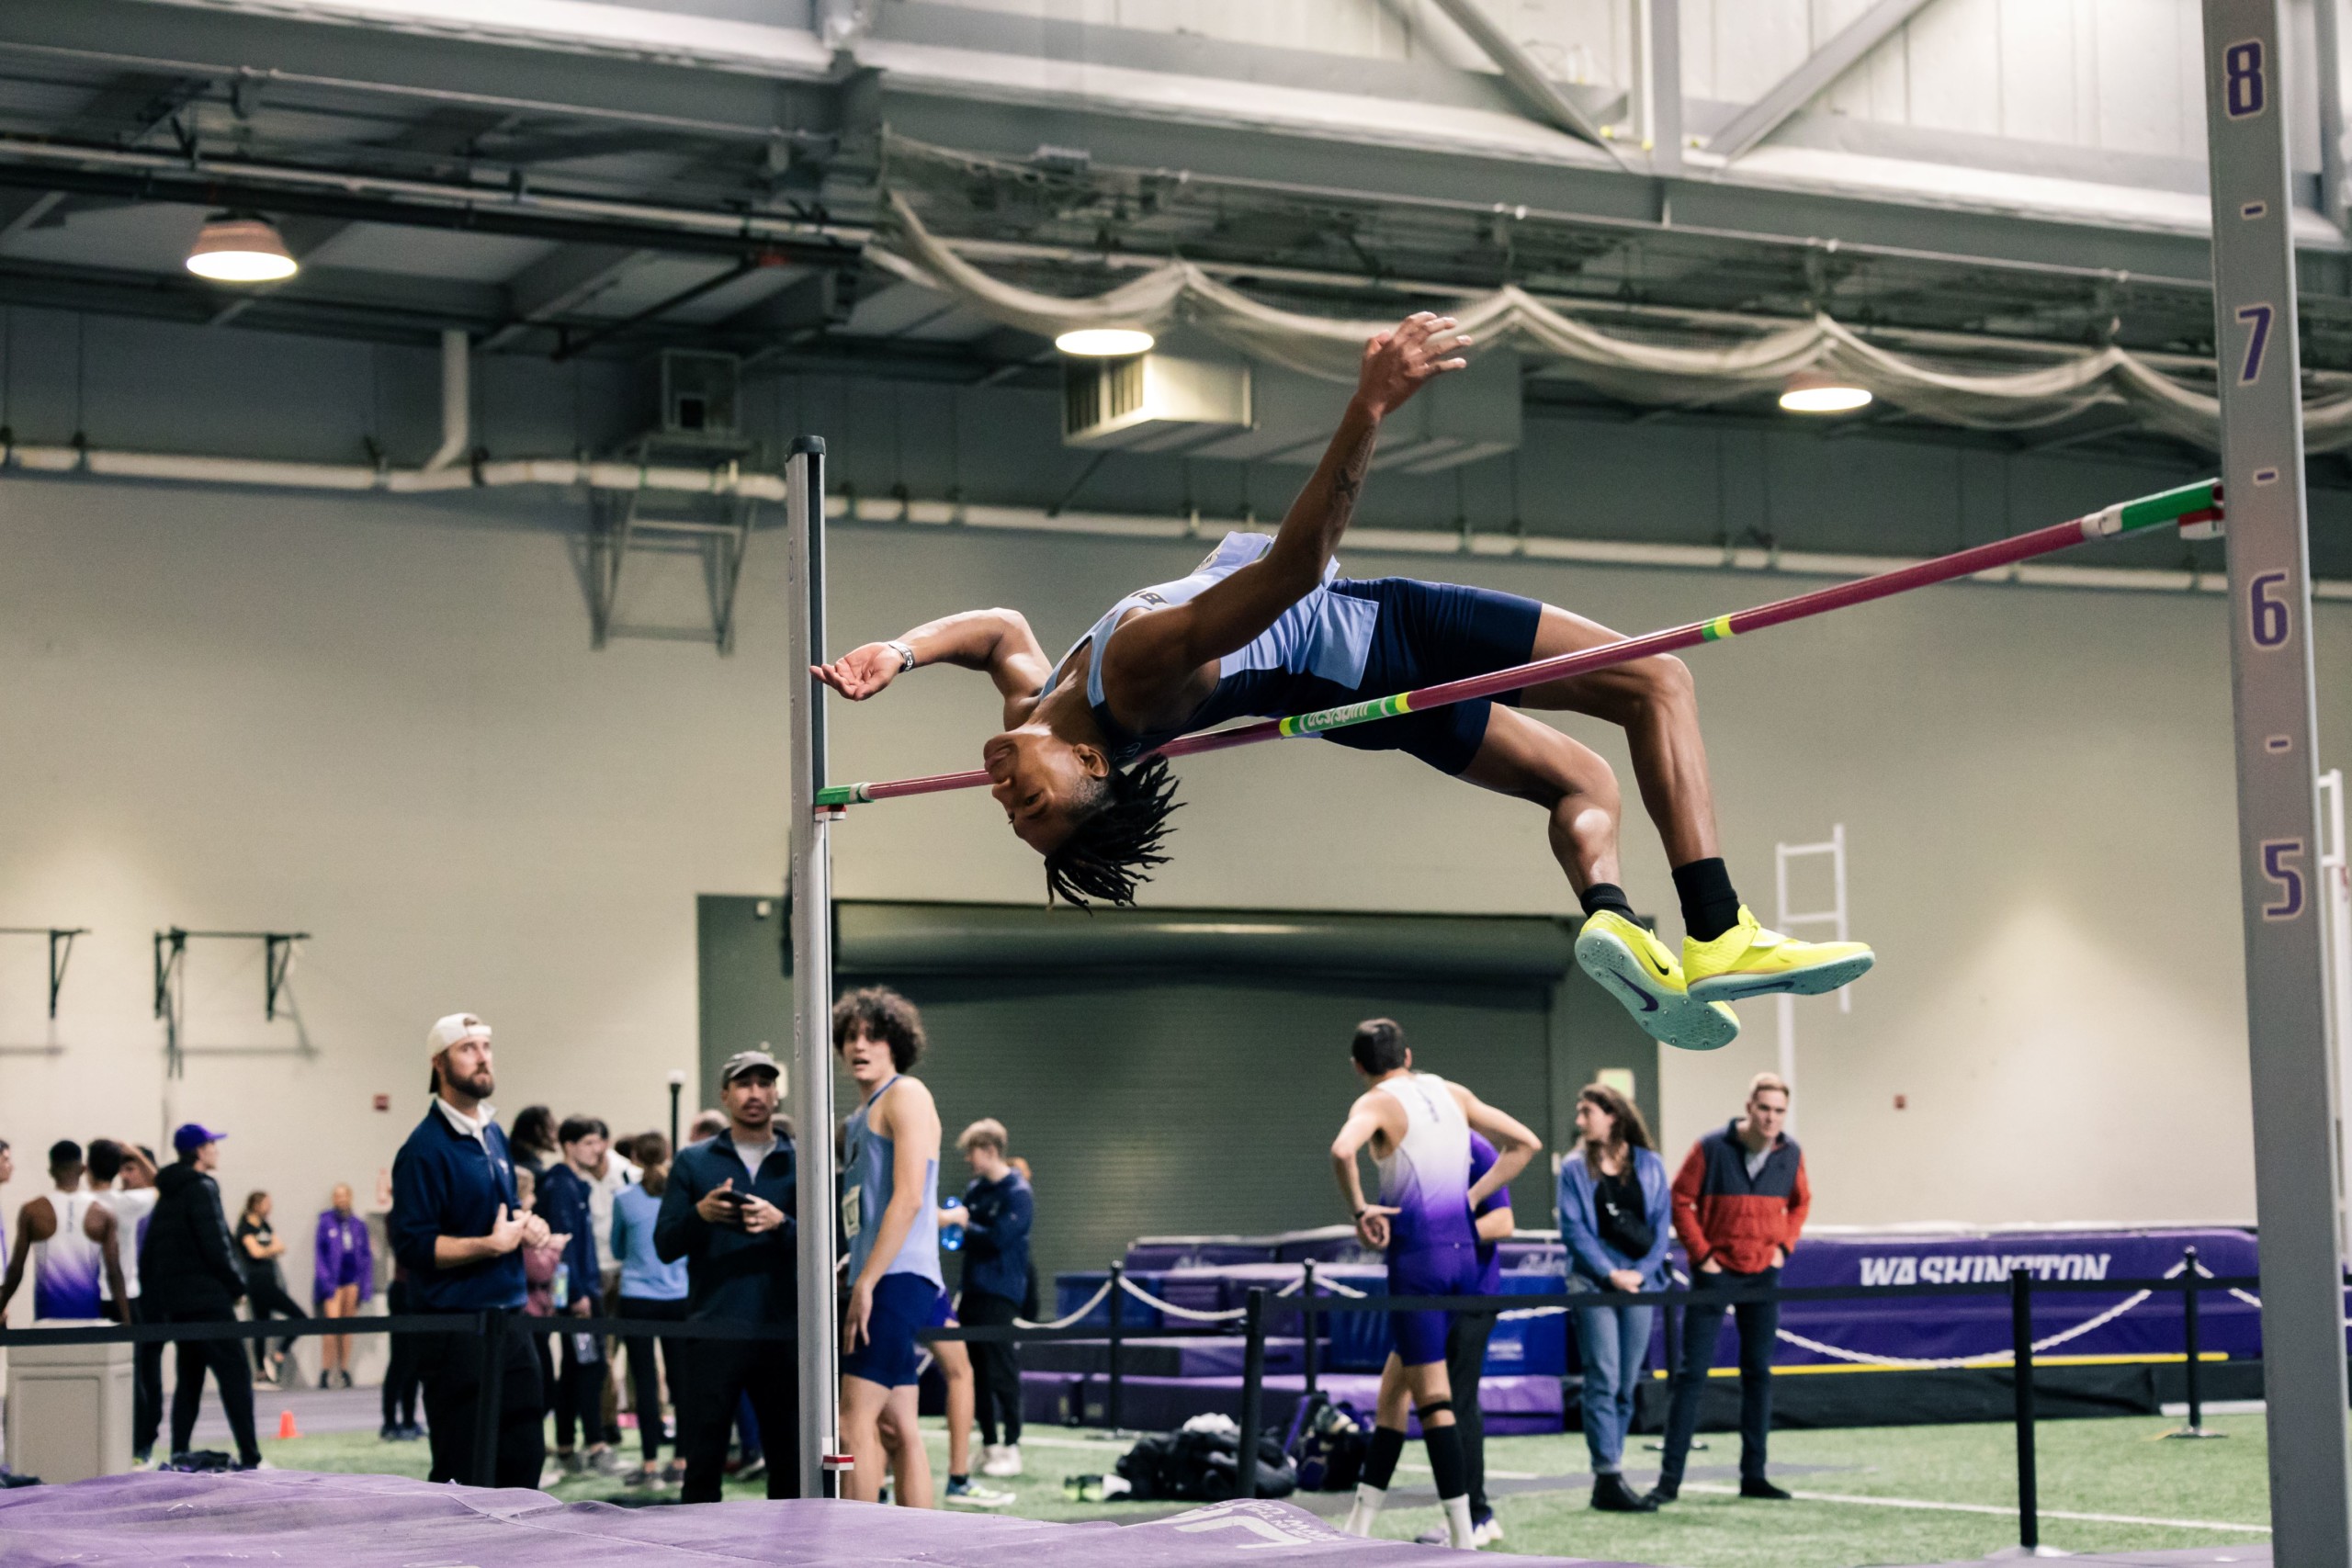 male athlete in midair on the high jump at an indoor track and field competition